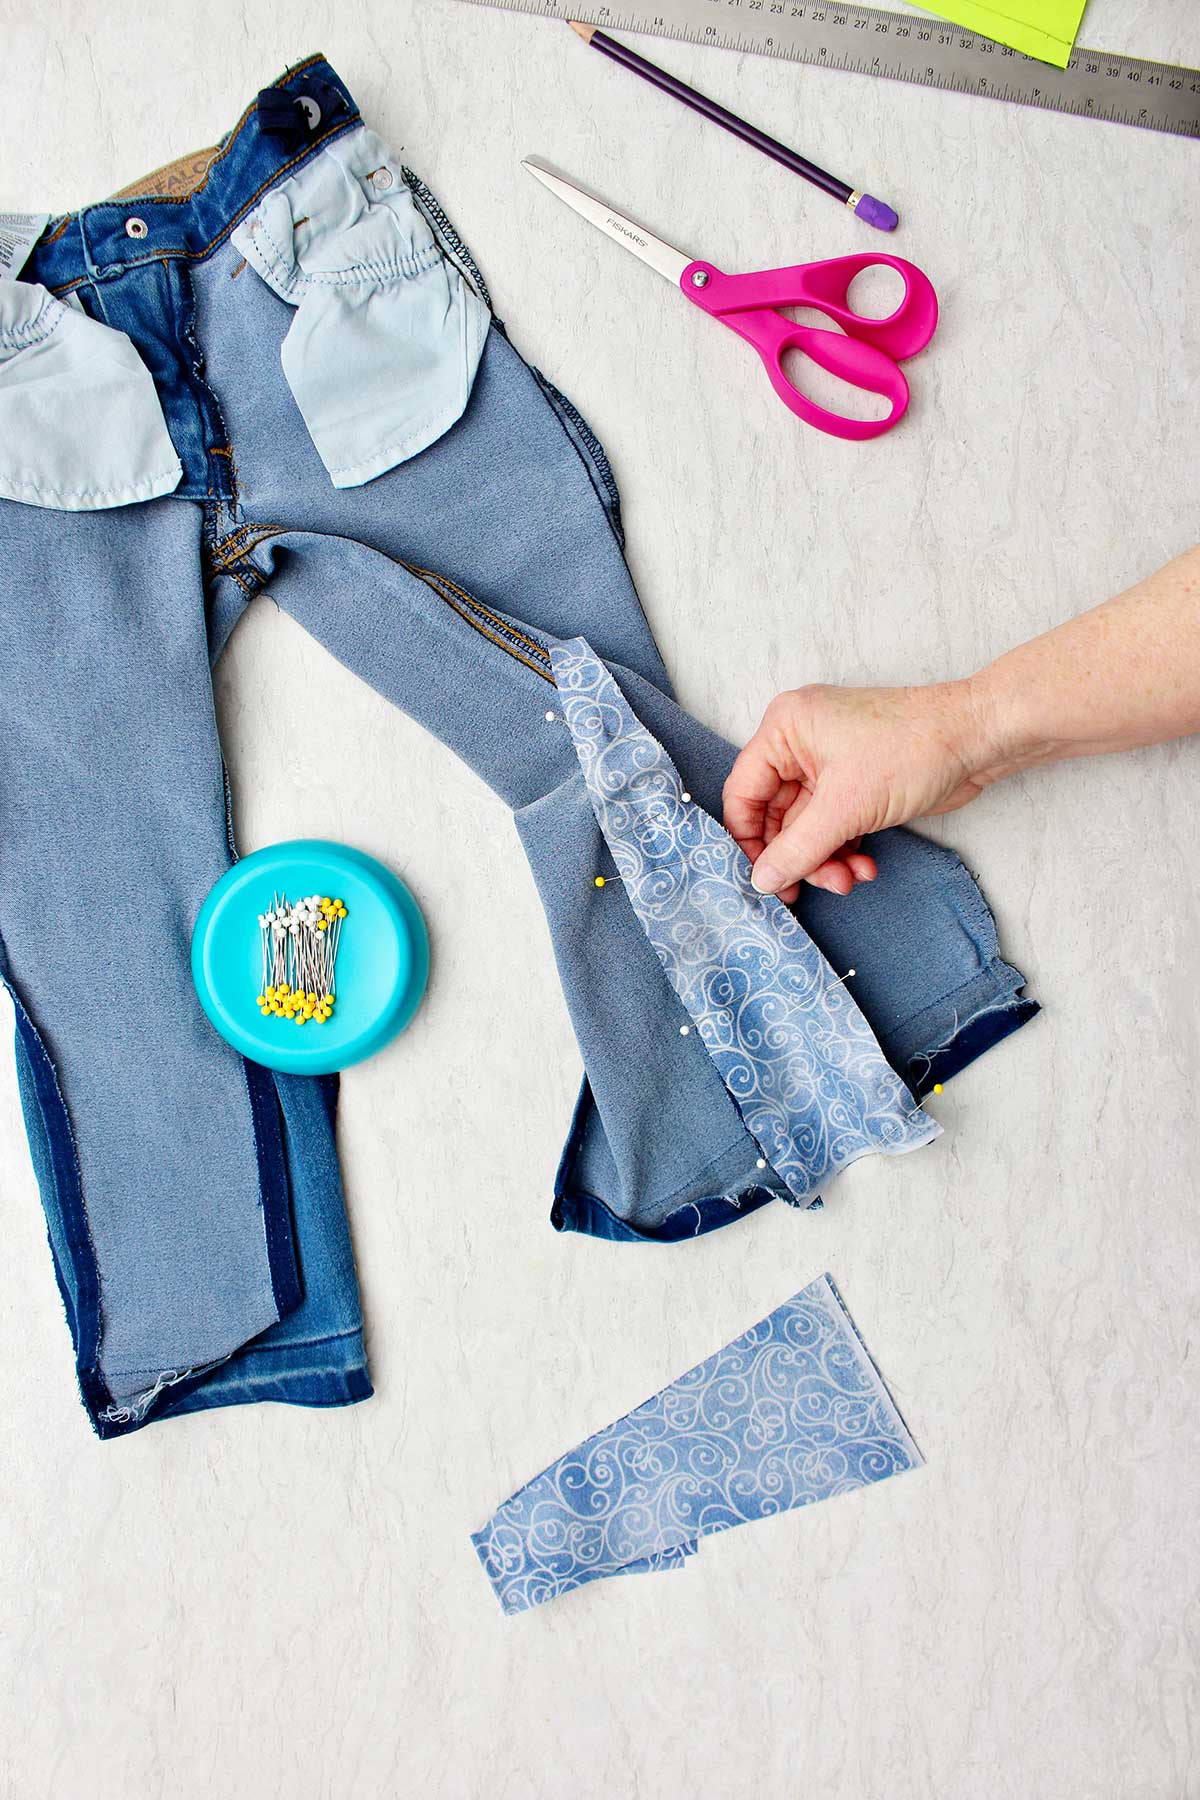 Hand holding fabric secured to jeans with straight pins with supplies near by.